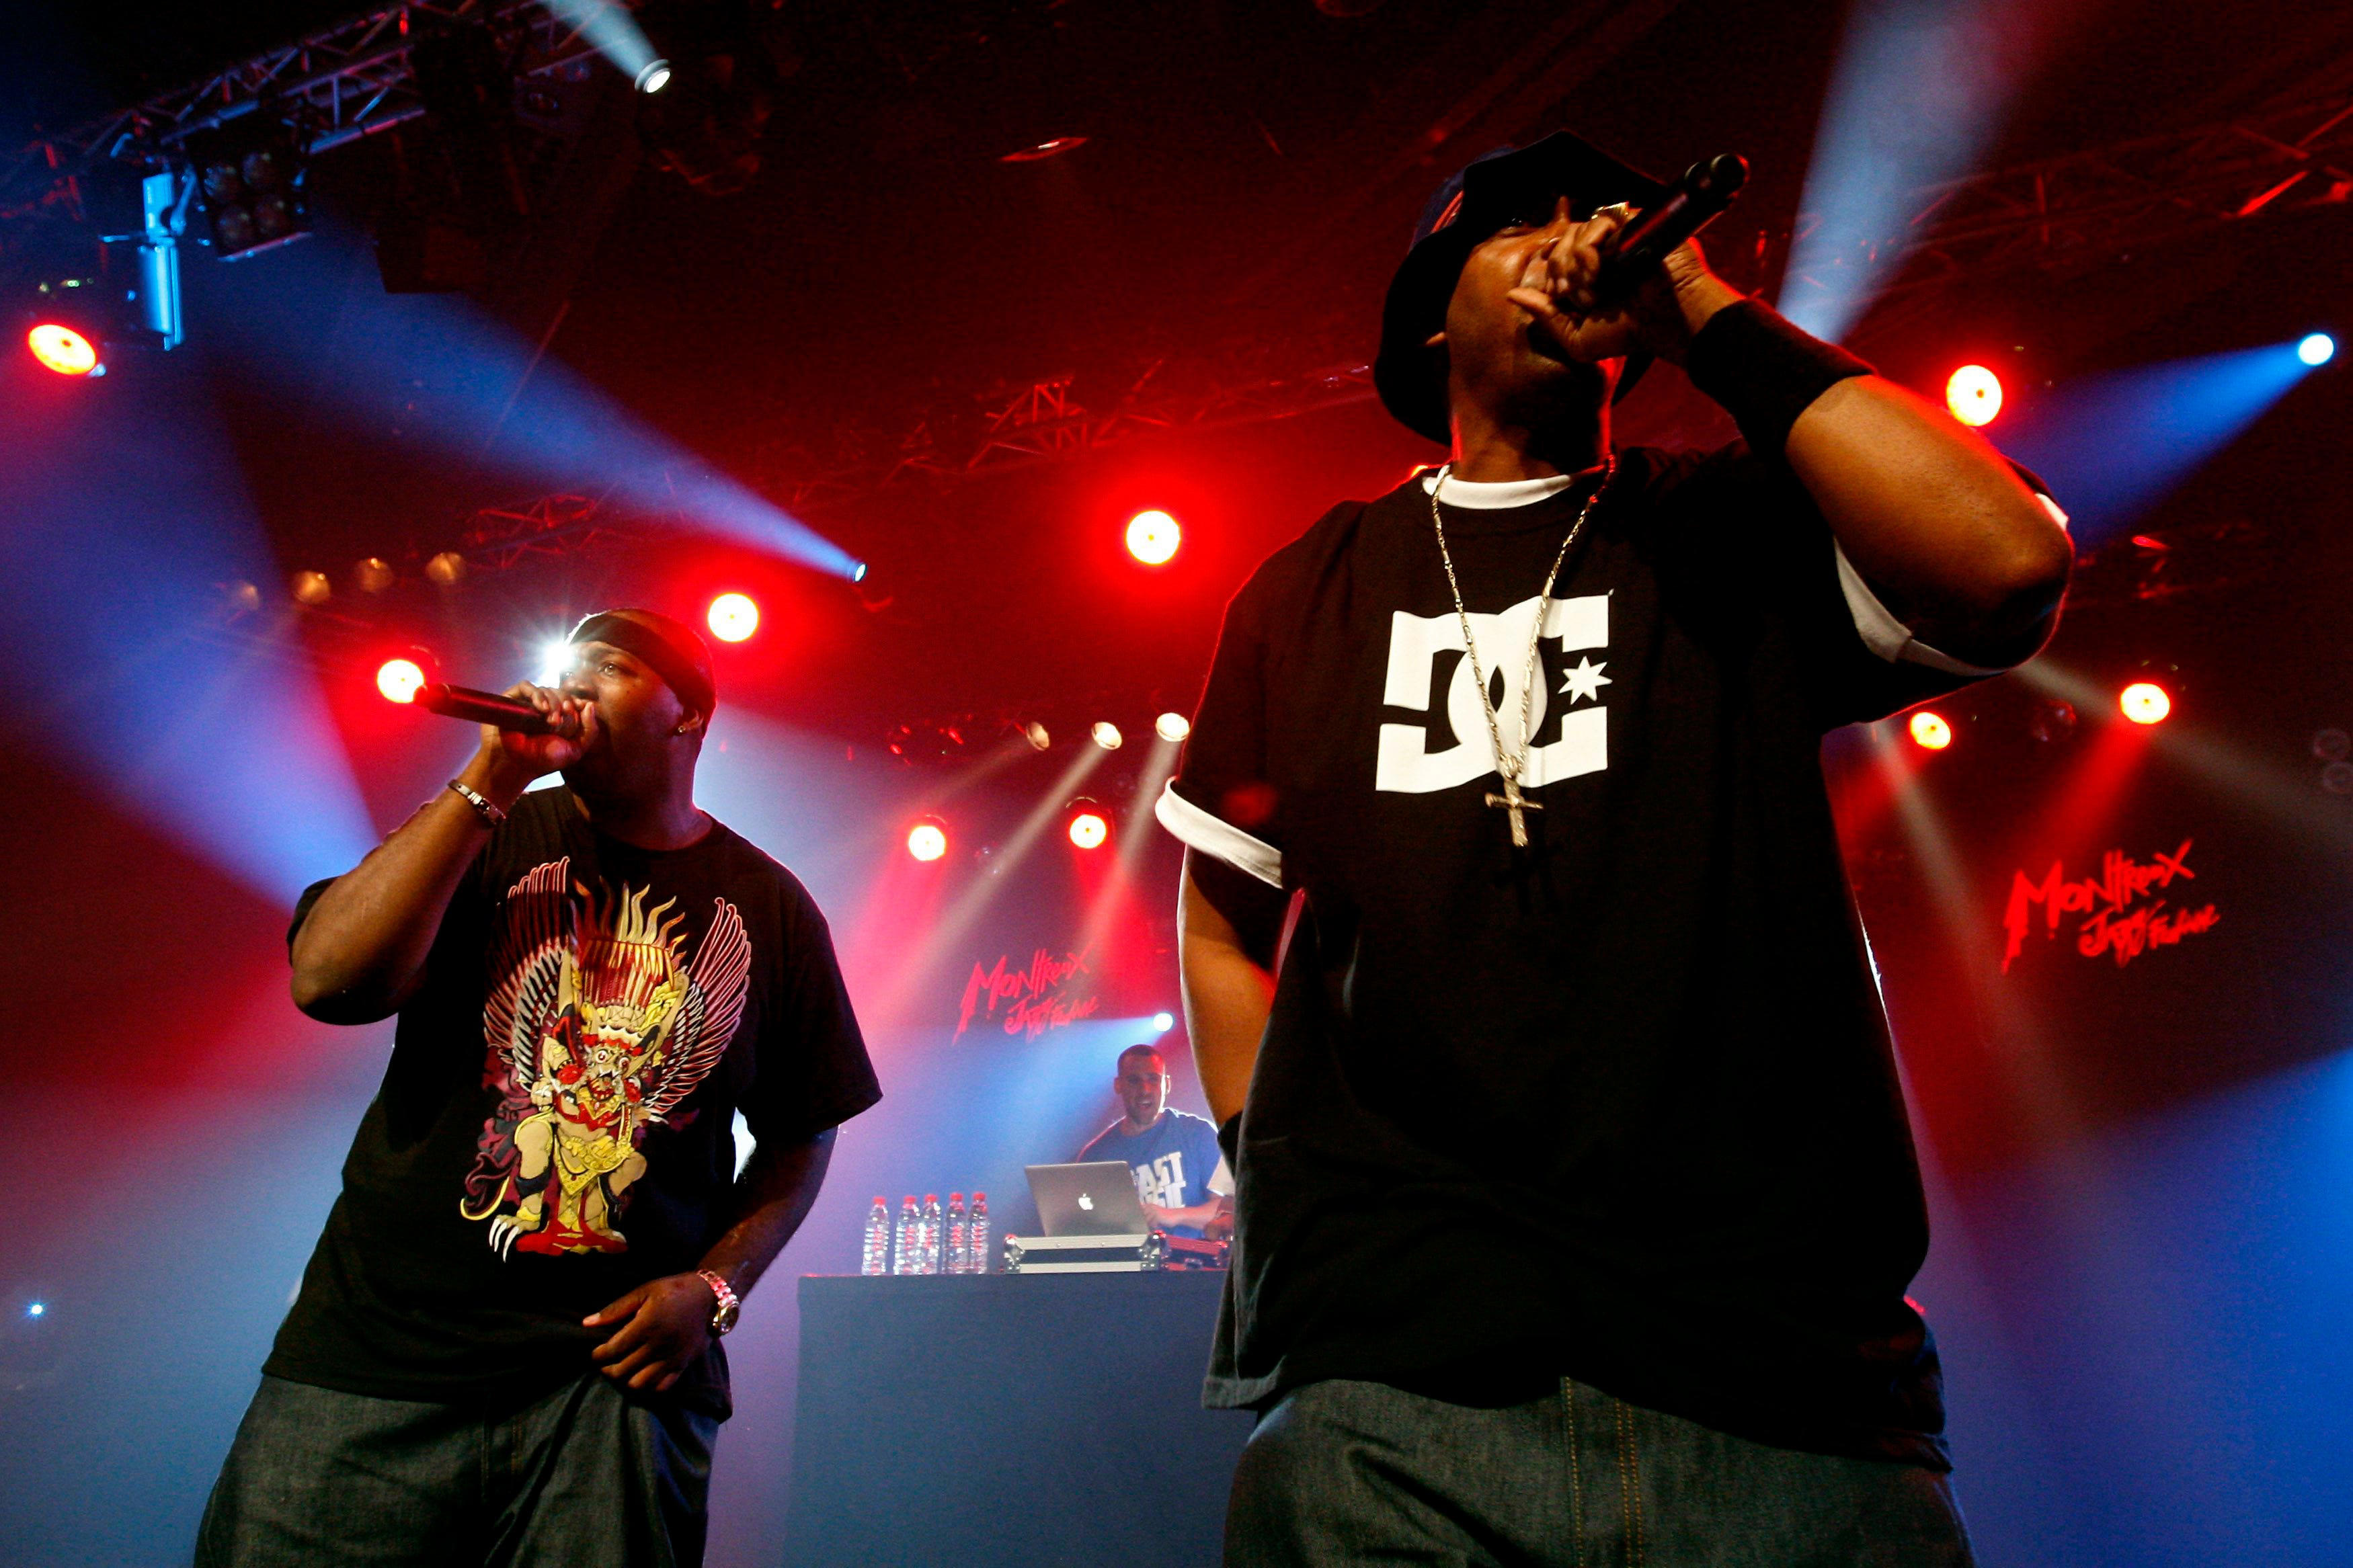 'We really rap' Masters of the Mic tour brings hiphop icons EPMD